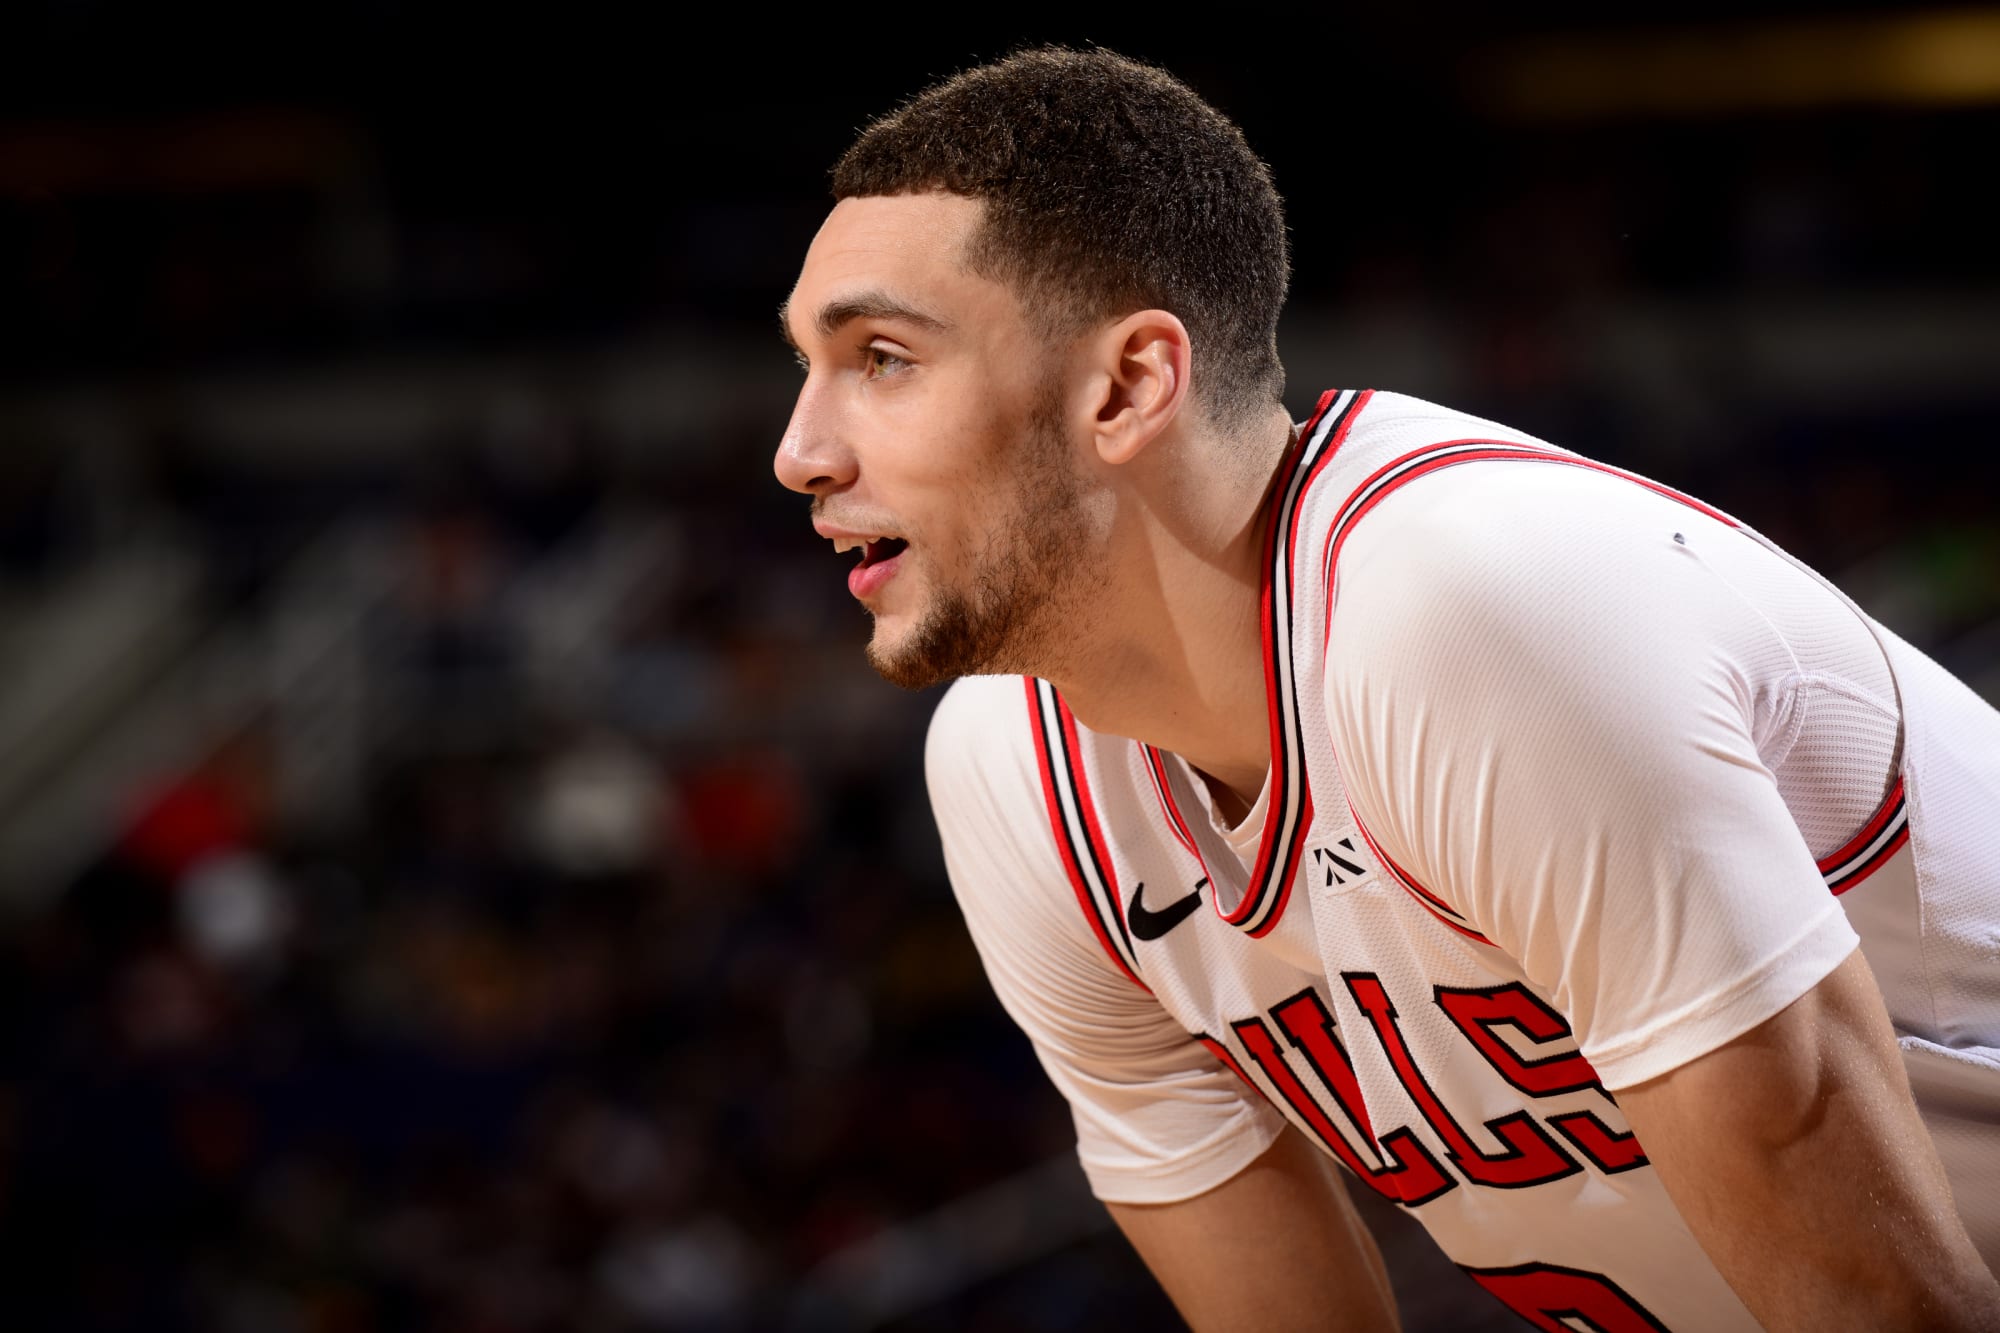 Chicago Bulls: Is Zach Lavine ready to meet everyone's expectations?